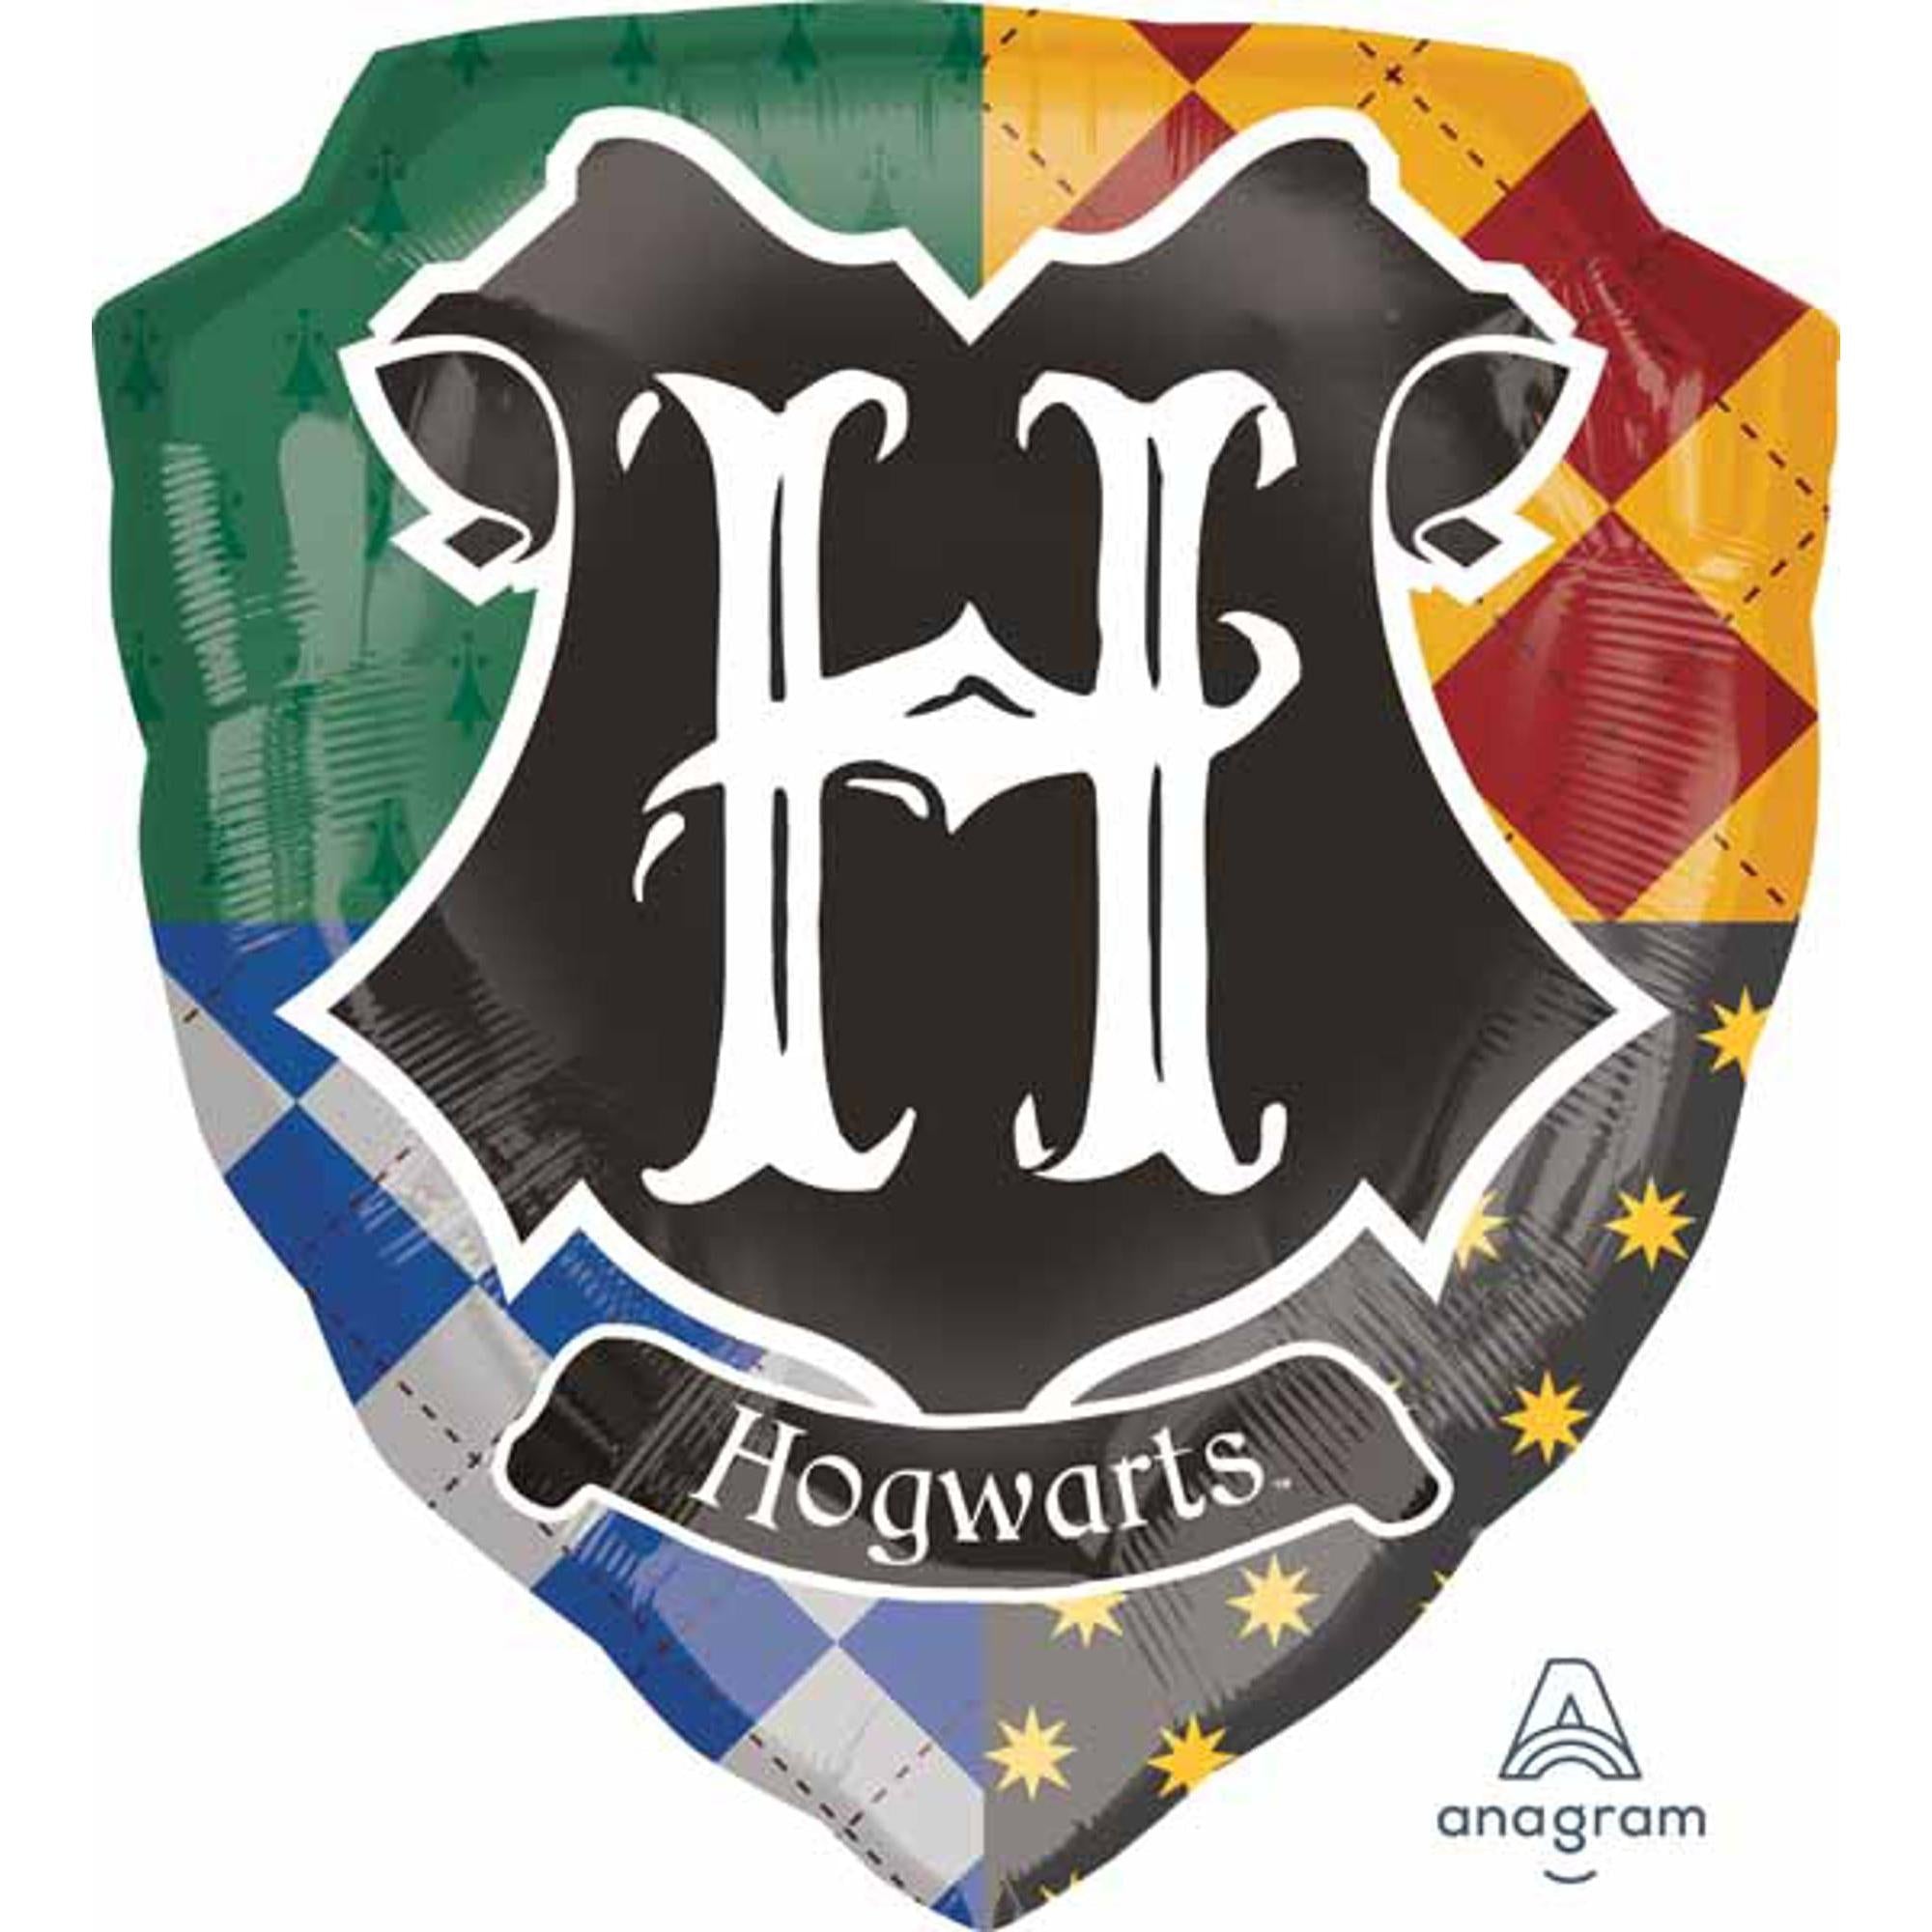 Harry Potter, Hogwarts Crest - Happy Christmas Wrapping Paper